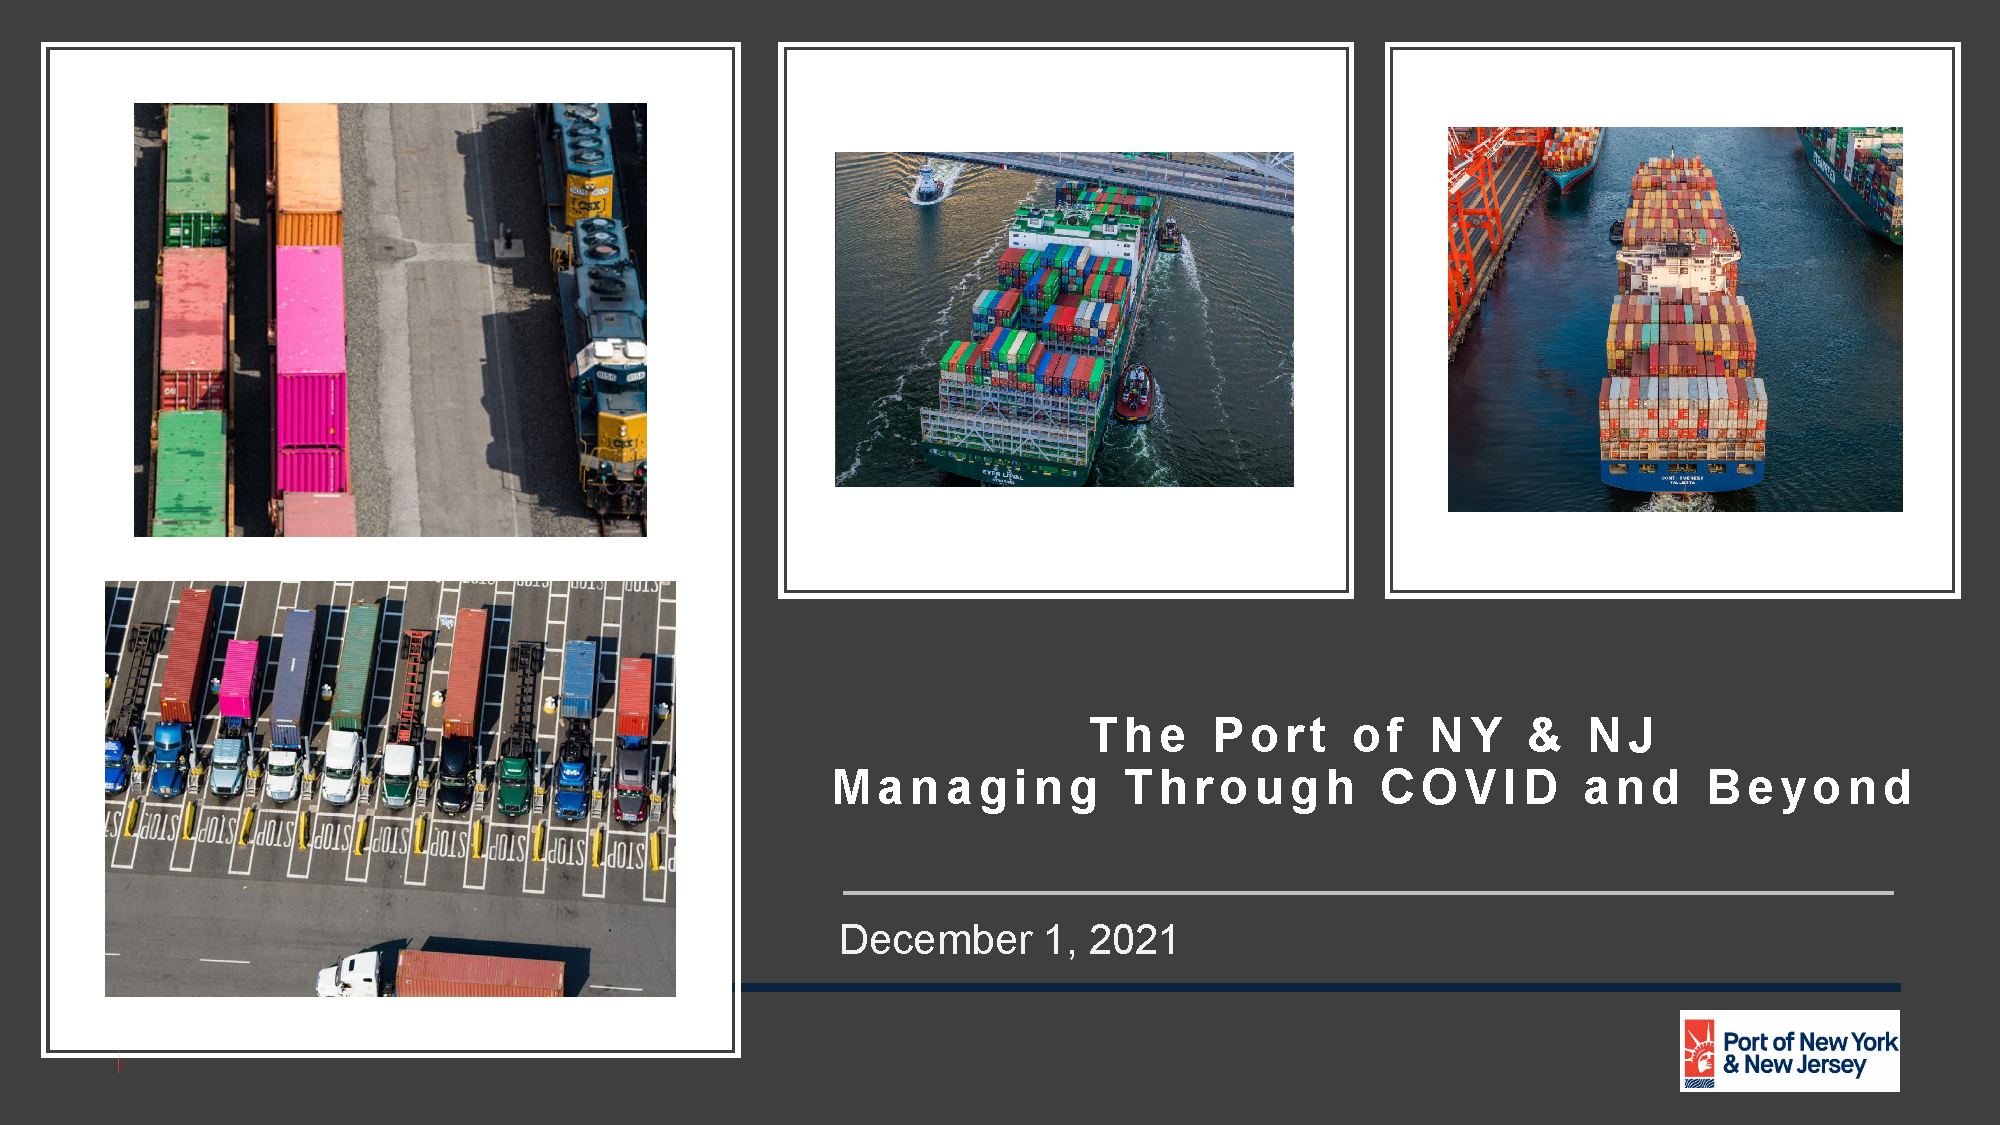 The Port of NY & NJ Managing Through COVID and Beyond